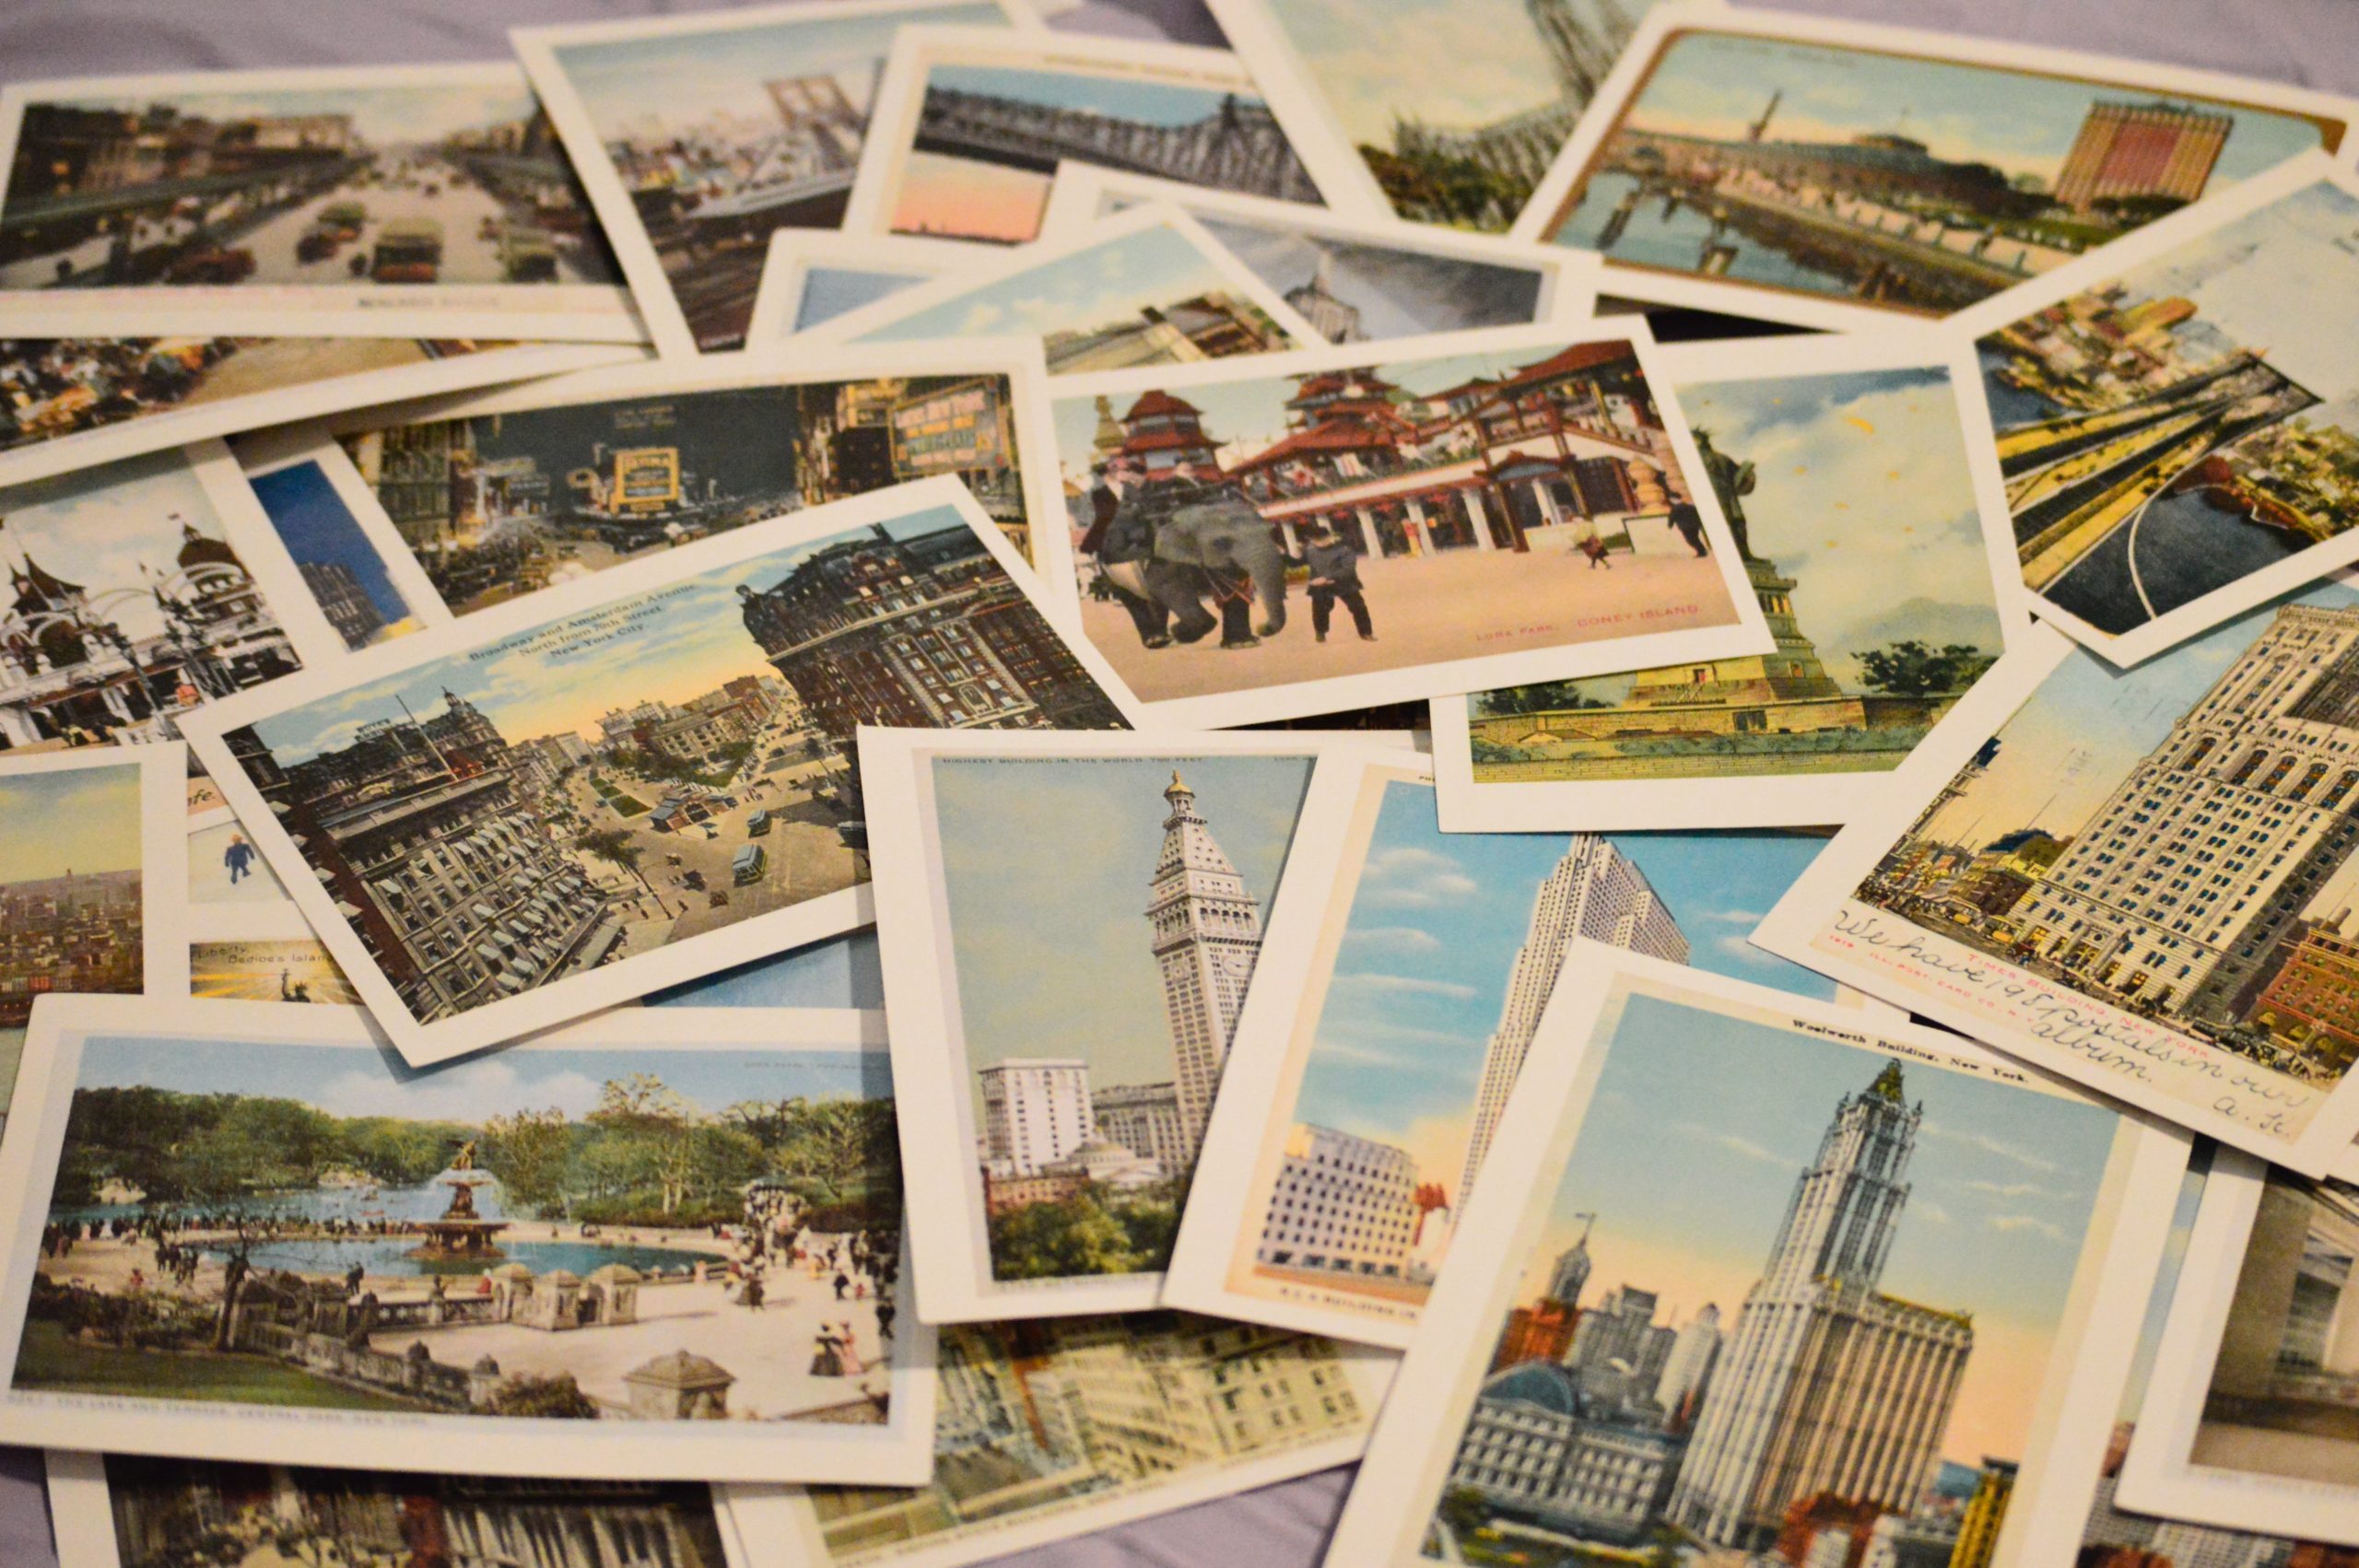 Why You Should Always Mail Yourself a Postcard When Traveling